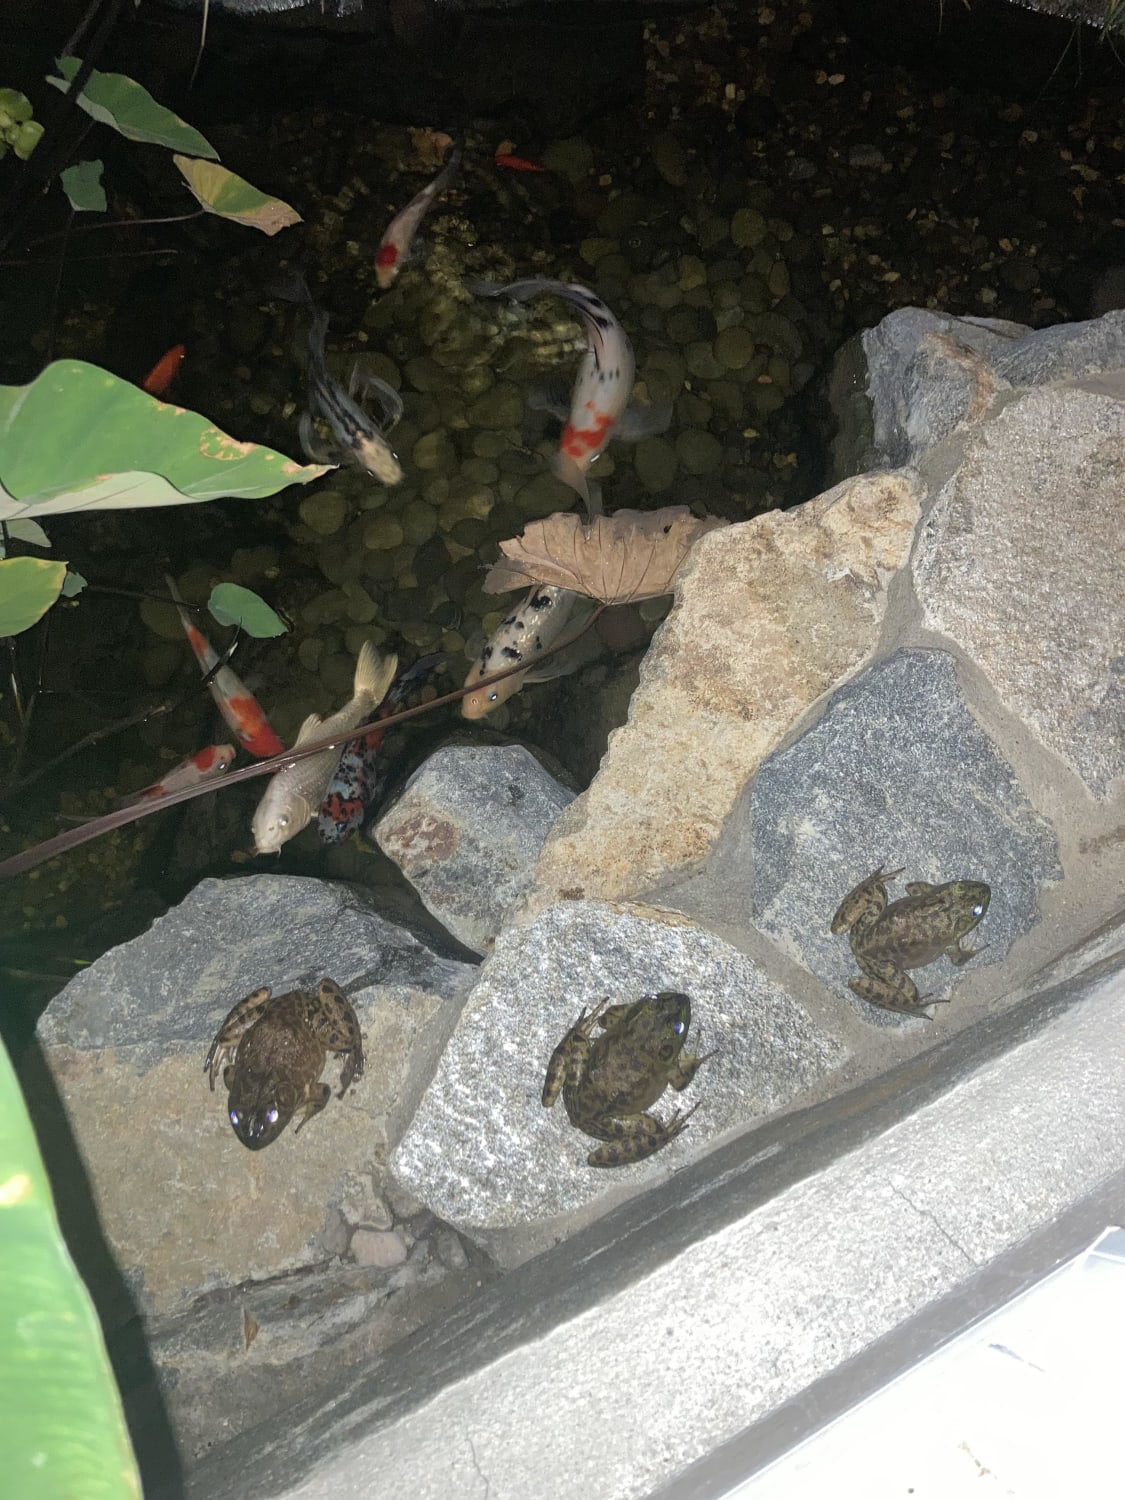 My boss has a koi pond and raised these frogs from tadpoles. She thought they looked a little thin so she decided to start feeding them mealworm. Now they wait for her every night.